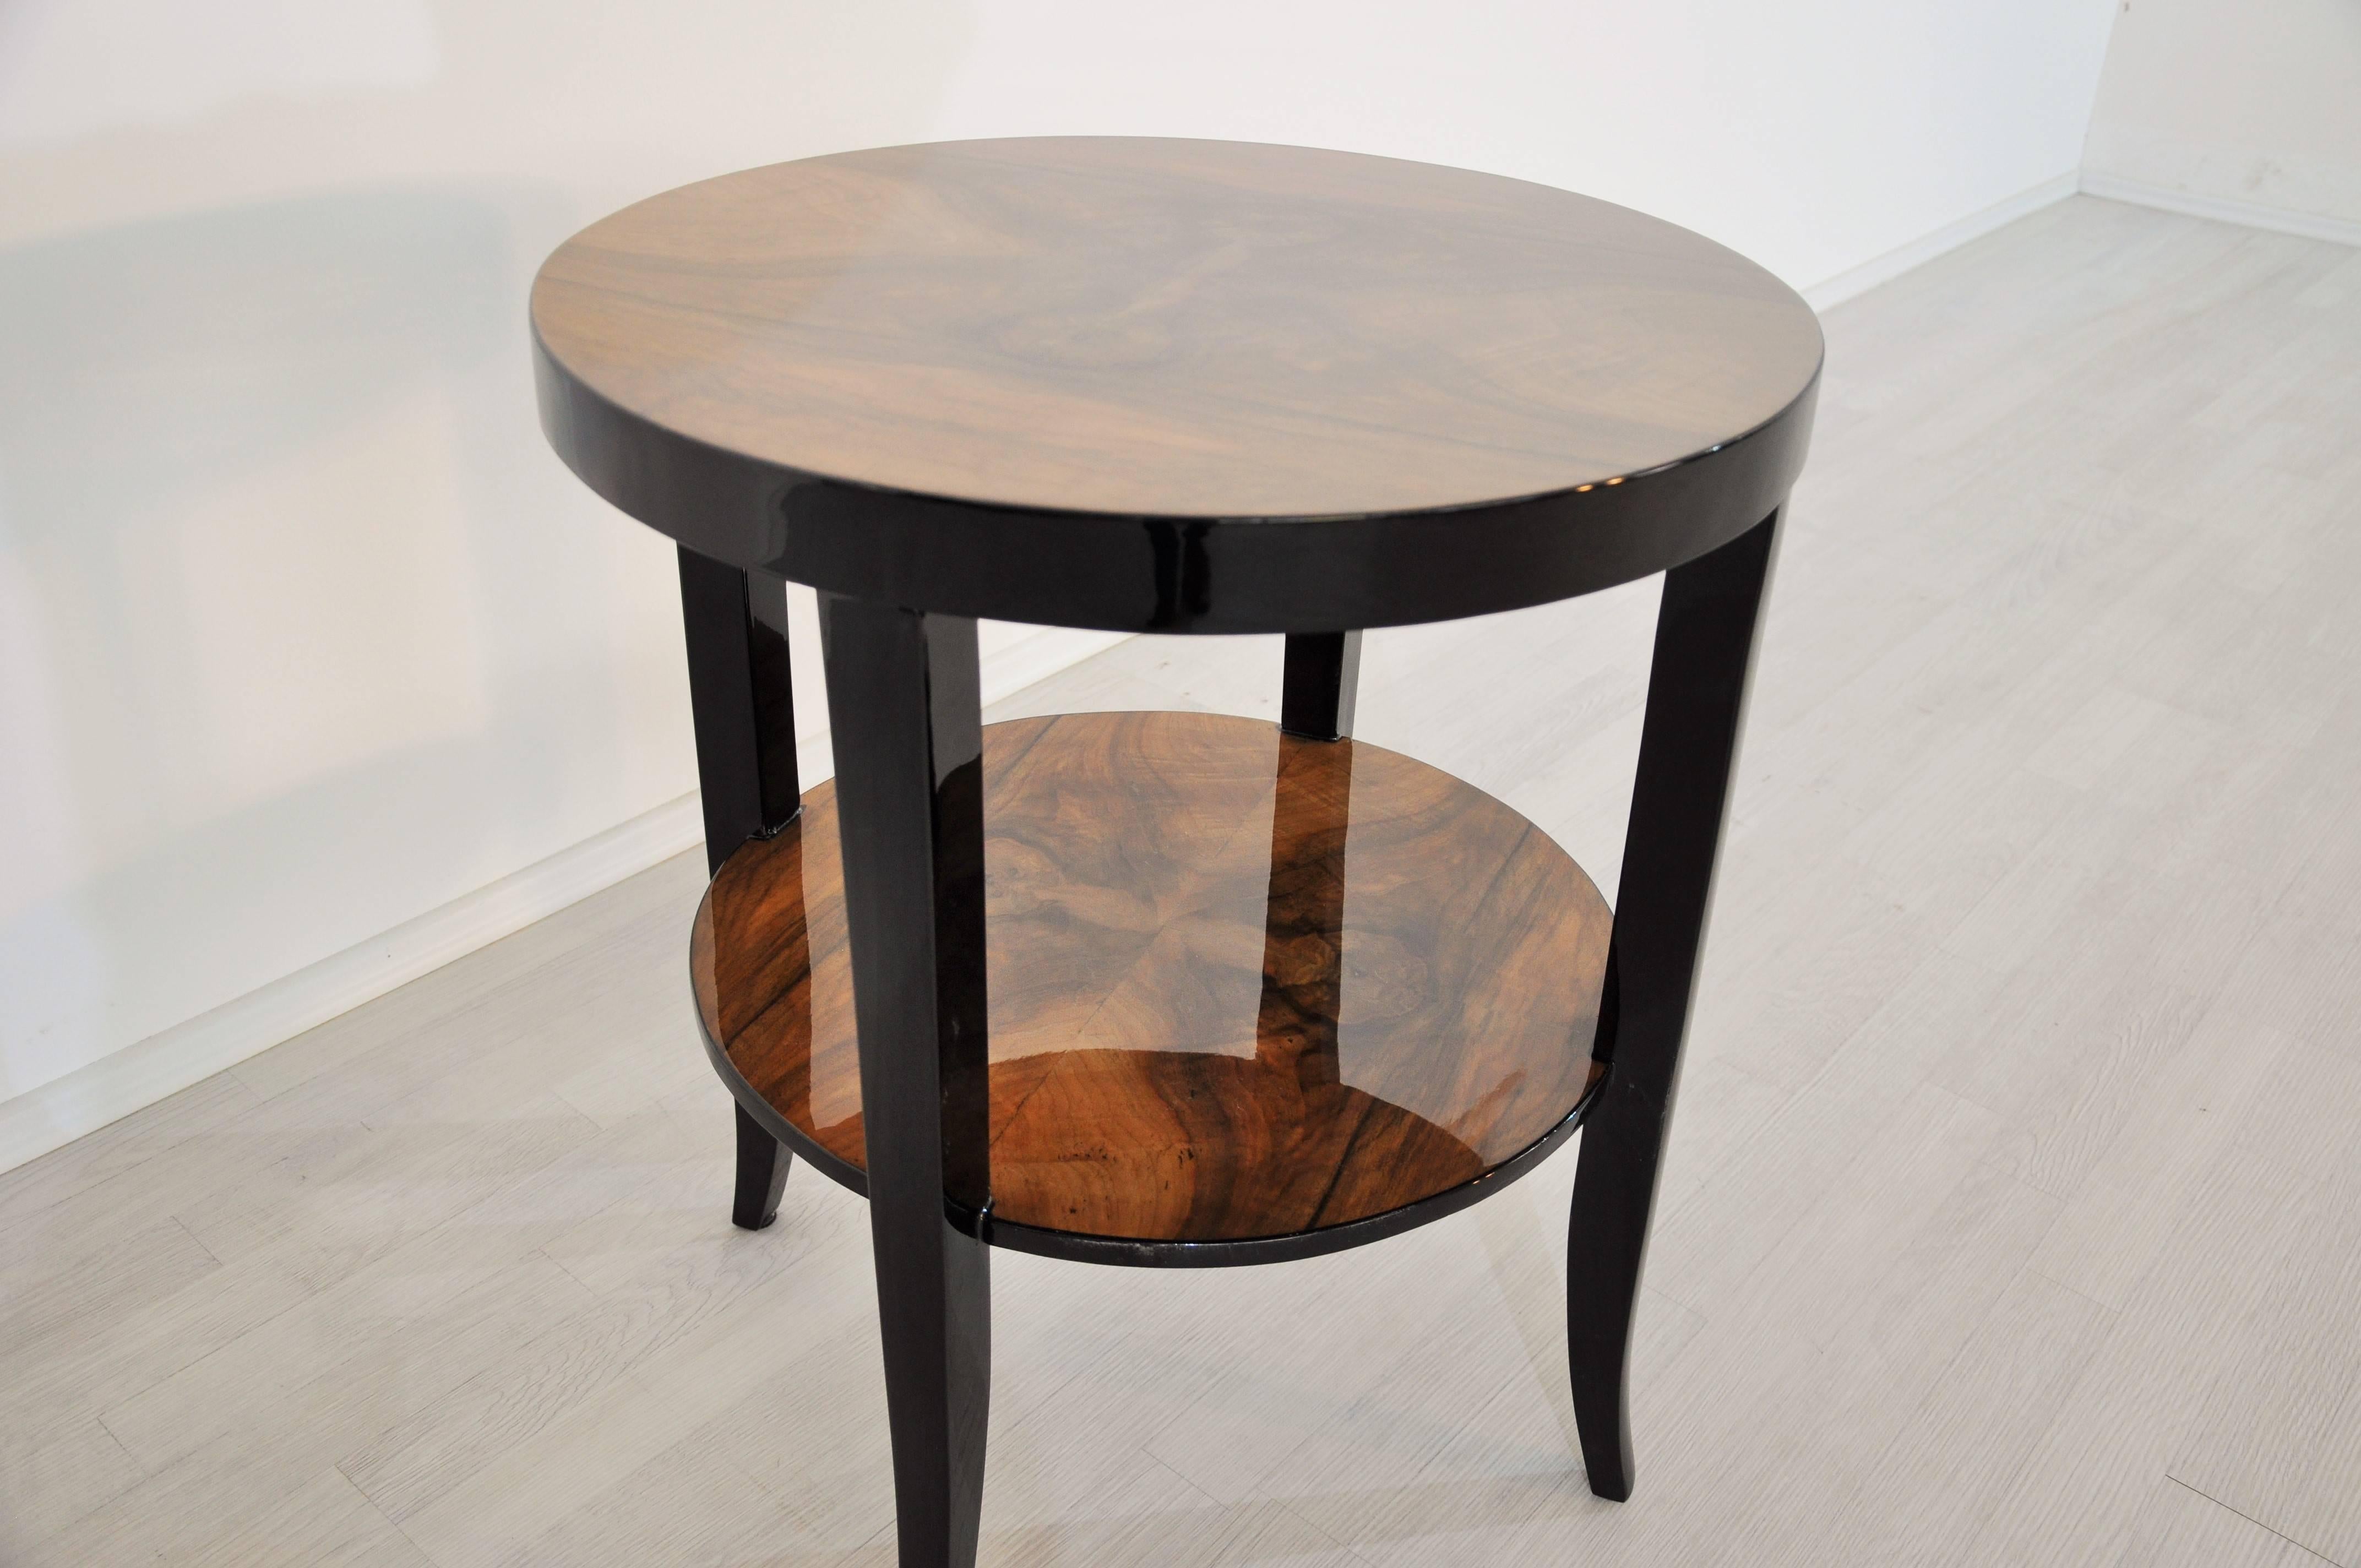 Hand-Crafted Art Deco Side Table with a Wonderful Walnut-Top